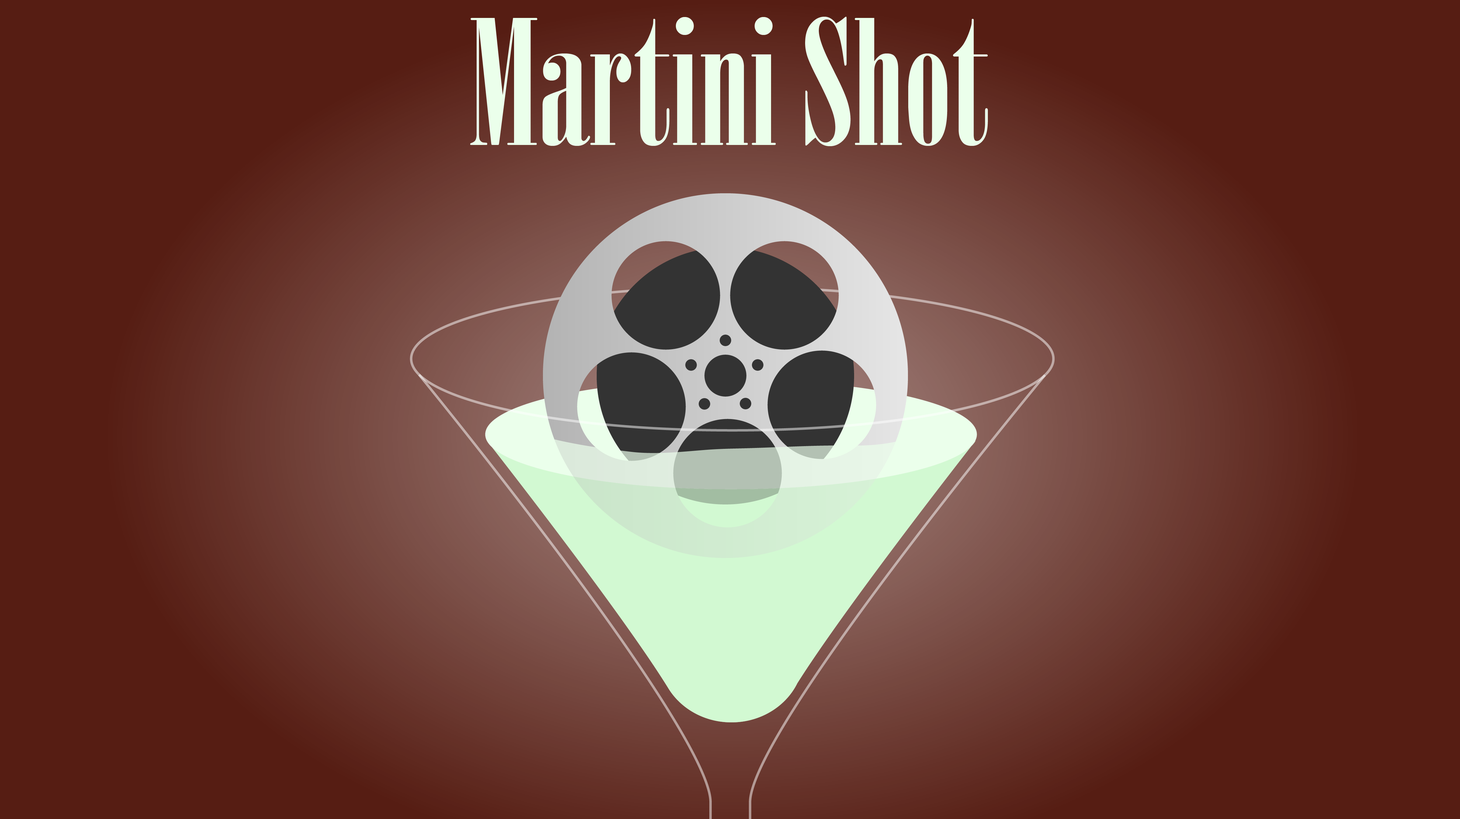 This is Rob Long and on today’s Martini Shot I talk about serial killers and families living together and all of the ways writers have of making the job a little easier and the viewer a little less inclined to grab the remote.